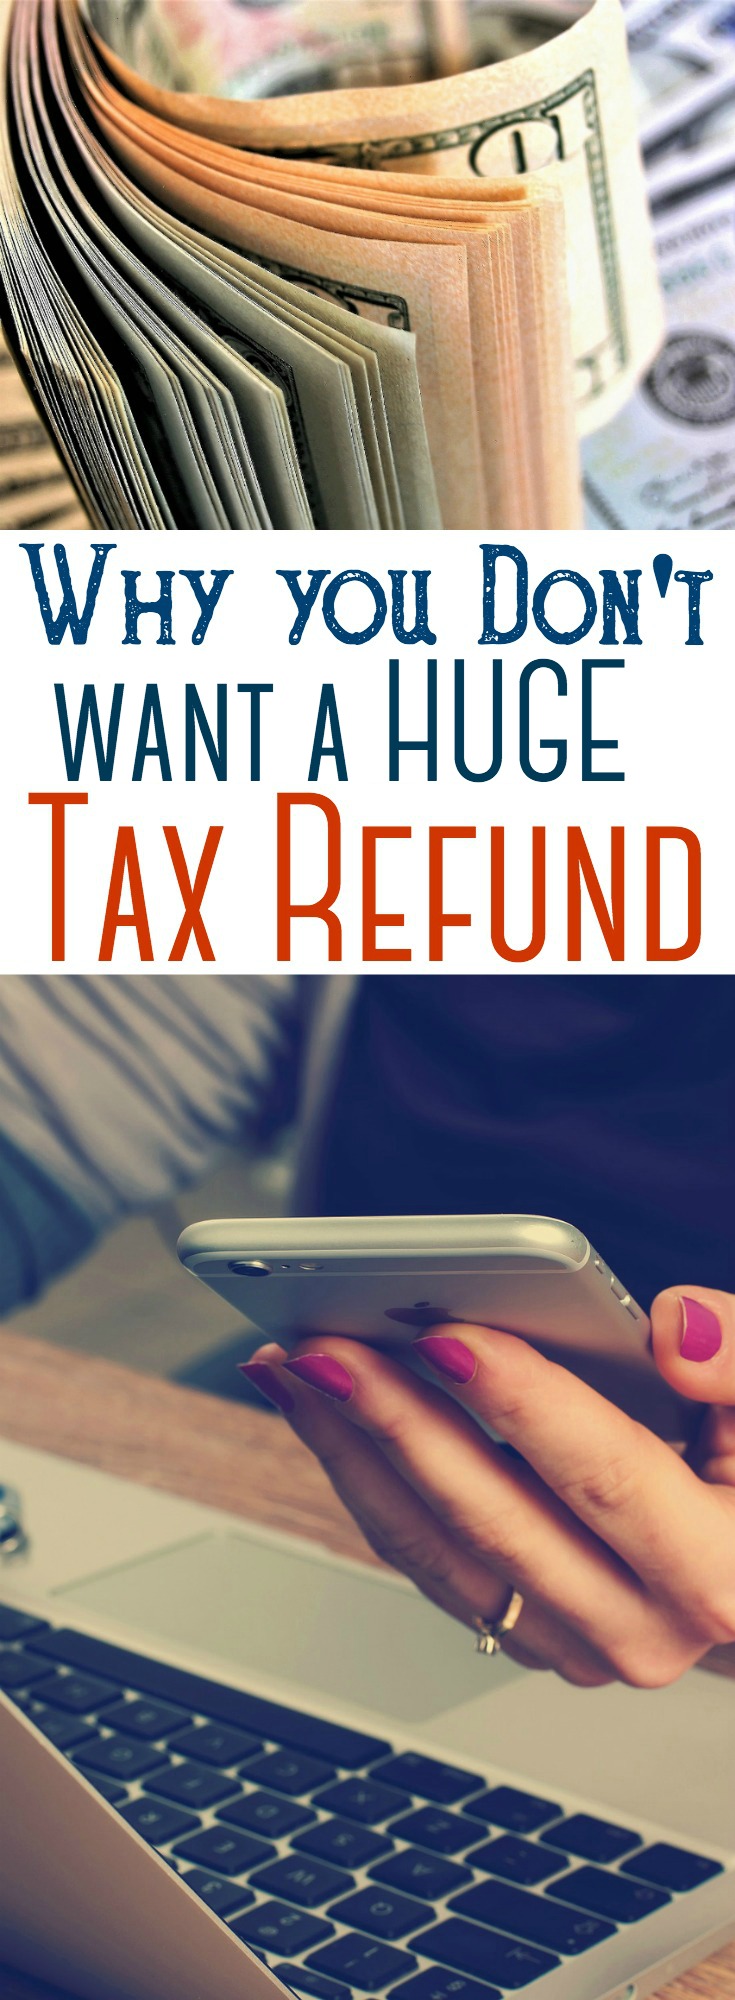 A tax refund, though it might seem like a windfall, isn't necessarily a good thing. Avoid that huge tax refund each year and make your money work harder for you. #taxes #refund #saving #finance #budget #investing #retirement